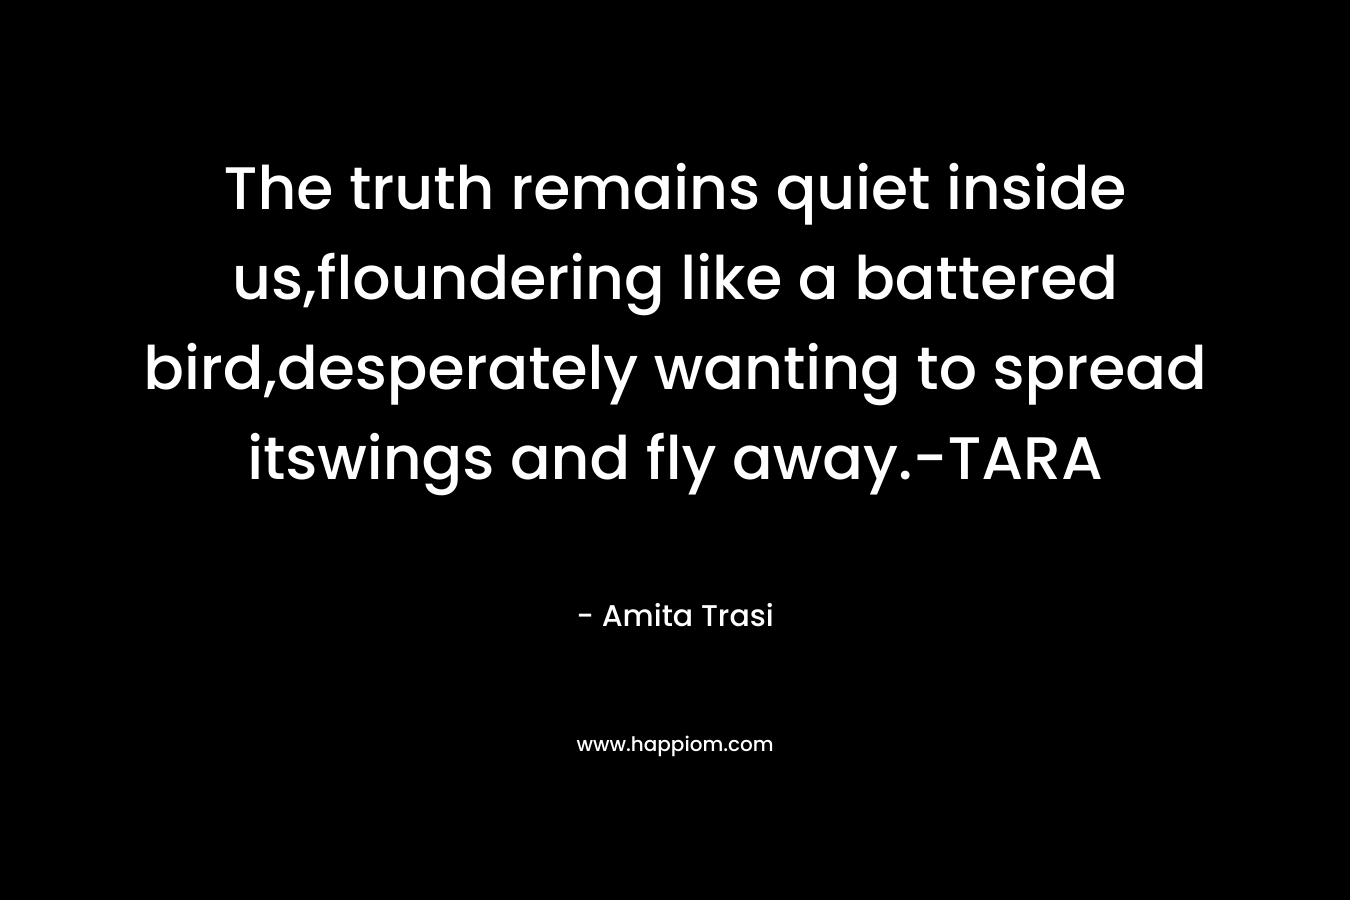 The truth remains quiet inside us,floundering like a battered bird,desperately wanting to spread itswings and fly away.-TARA